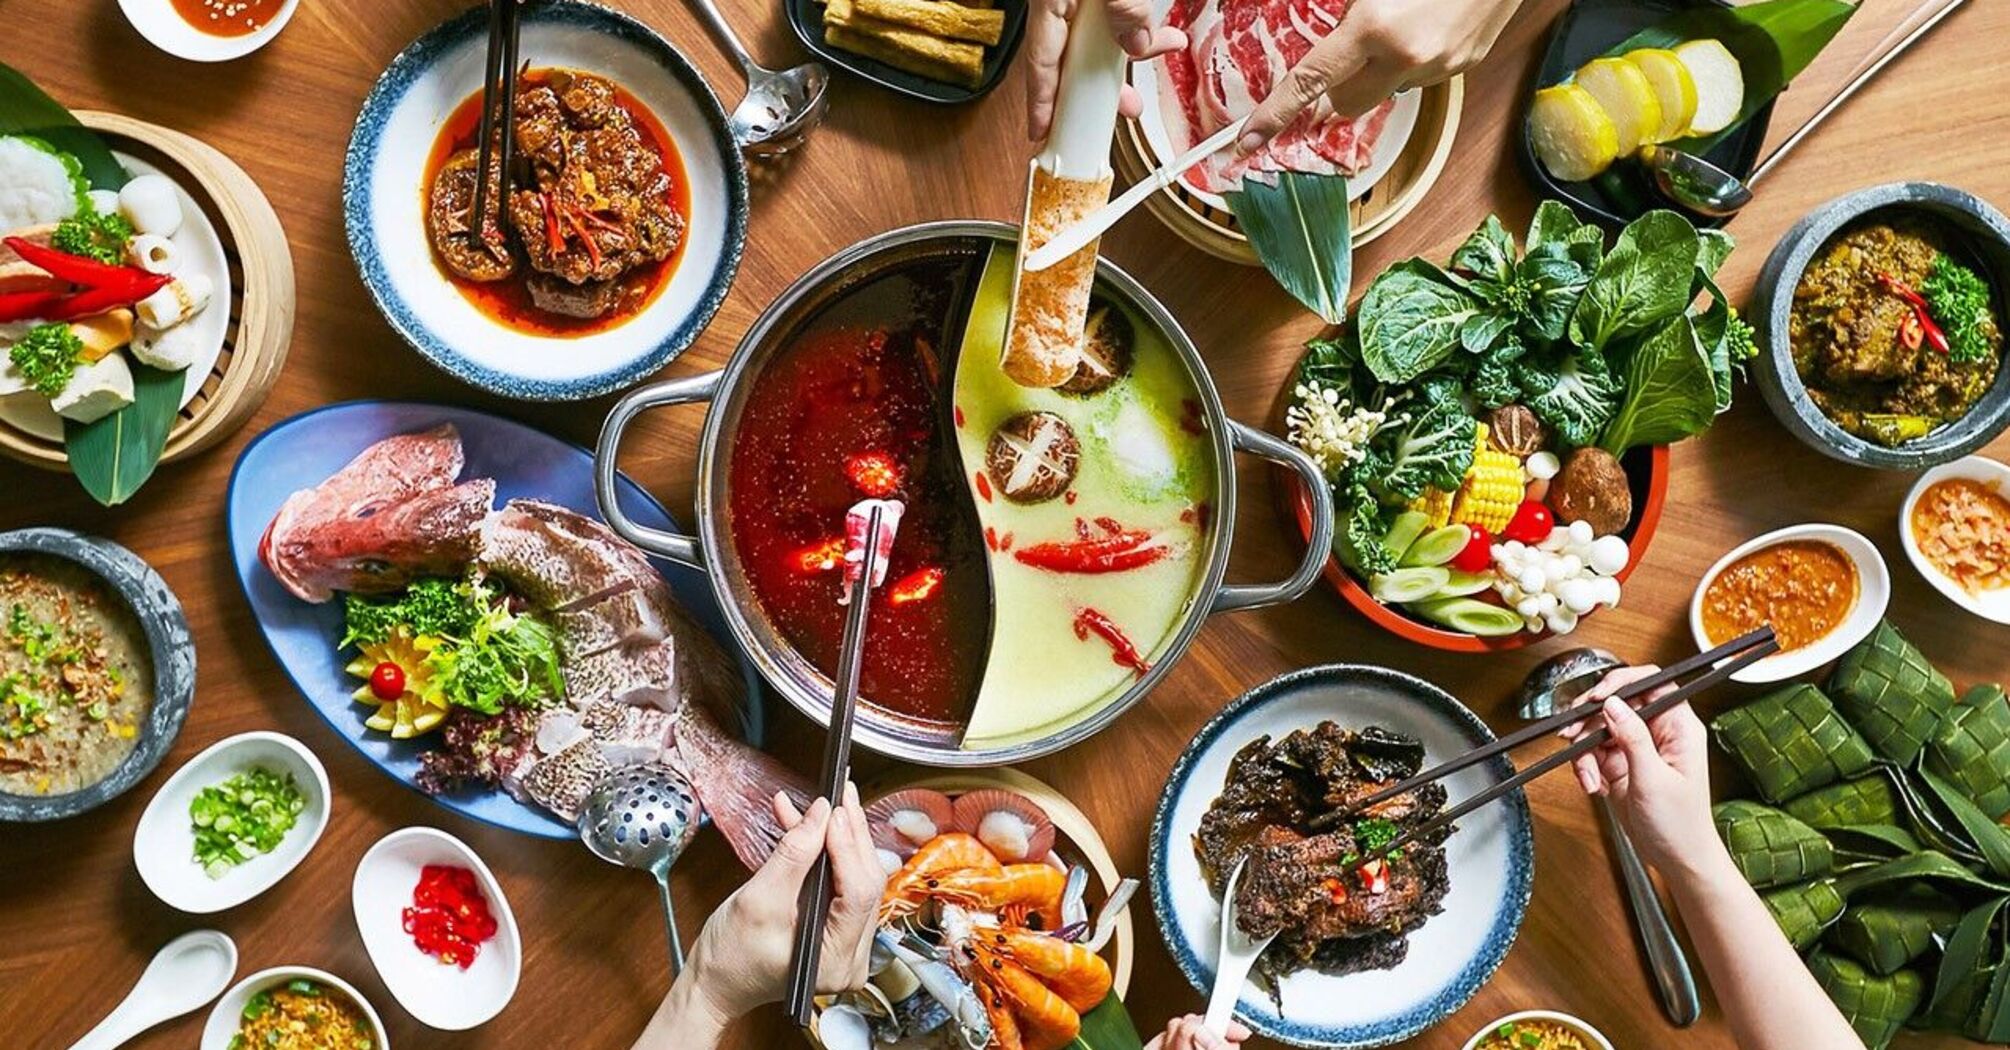 Top 9 hotels in Singapore serving halal buffets, from seafood and Indonesian dishes to tempting pastries and international cuisine